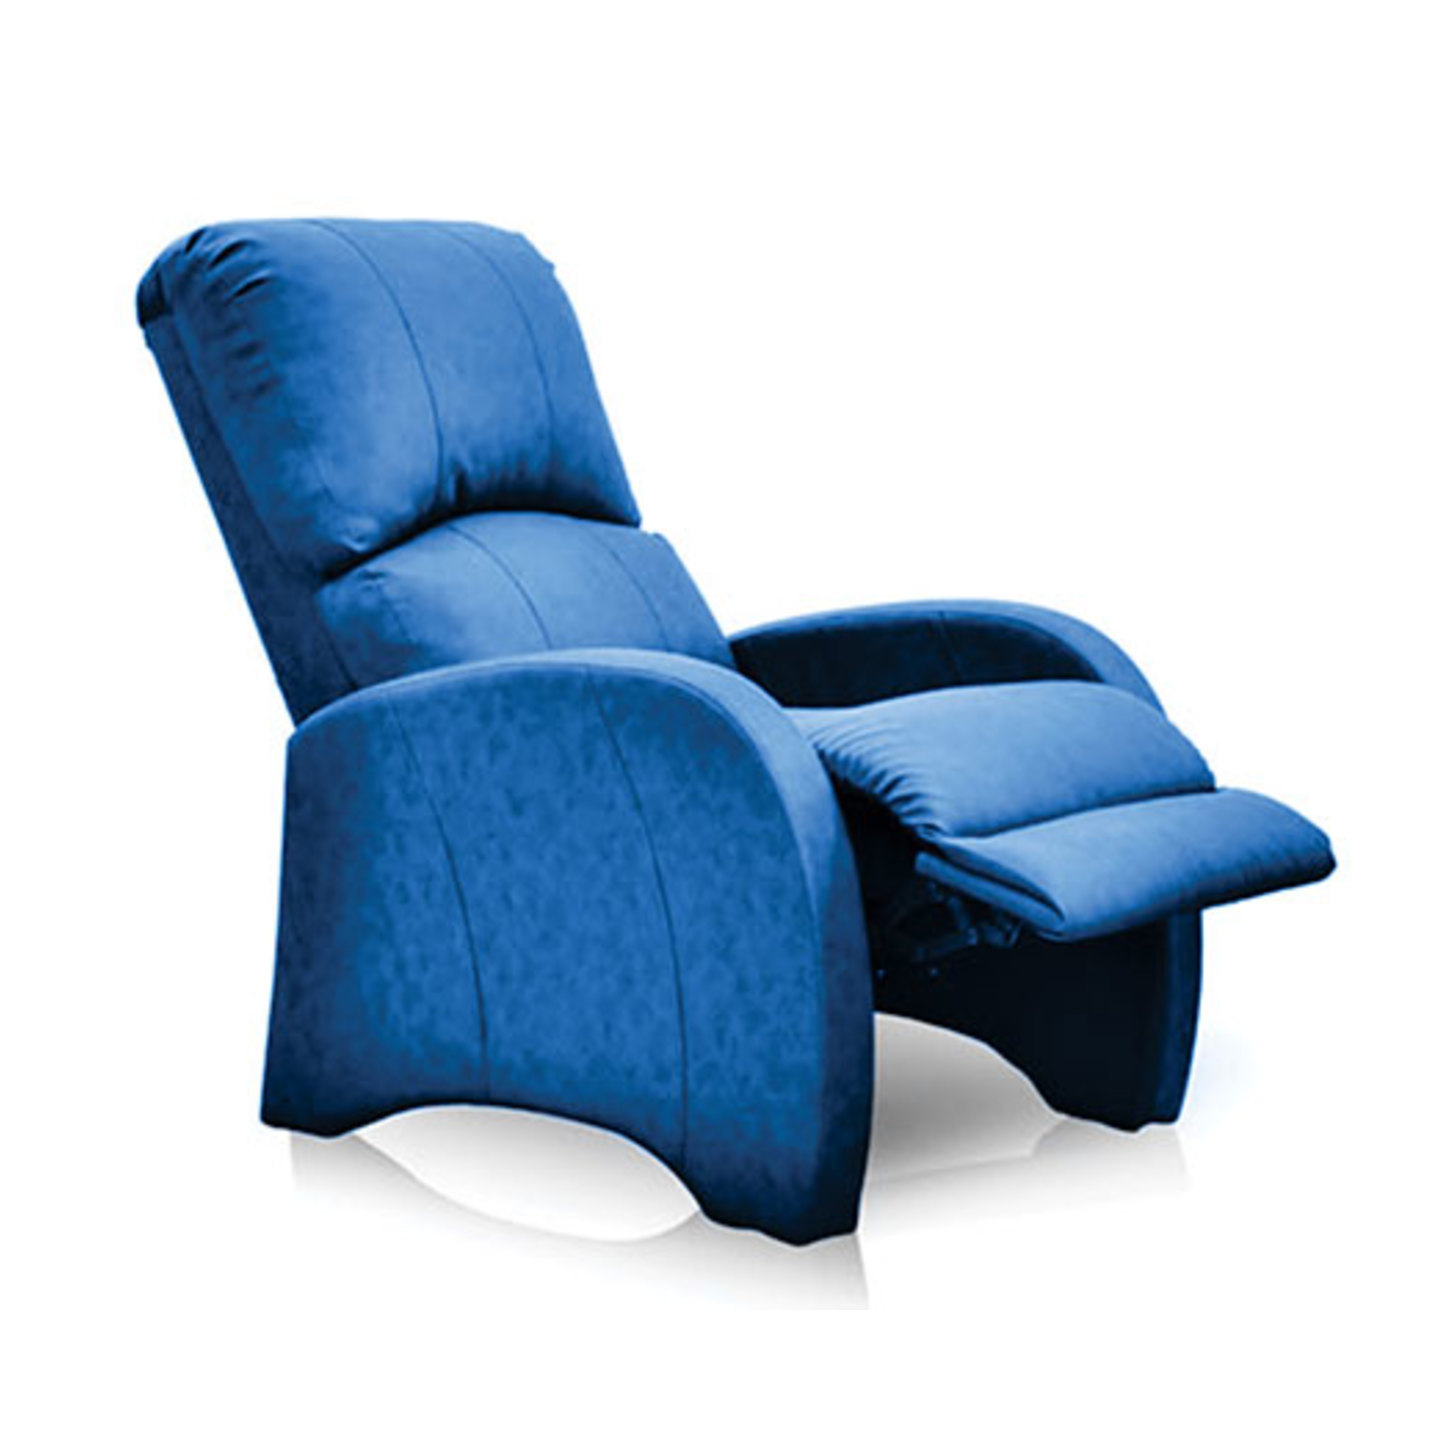 LN Recliner Chair Cubo Manual System In Blue Colour